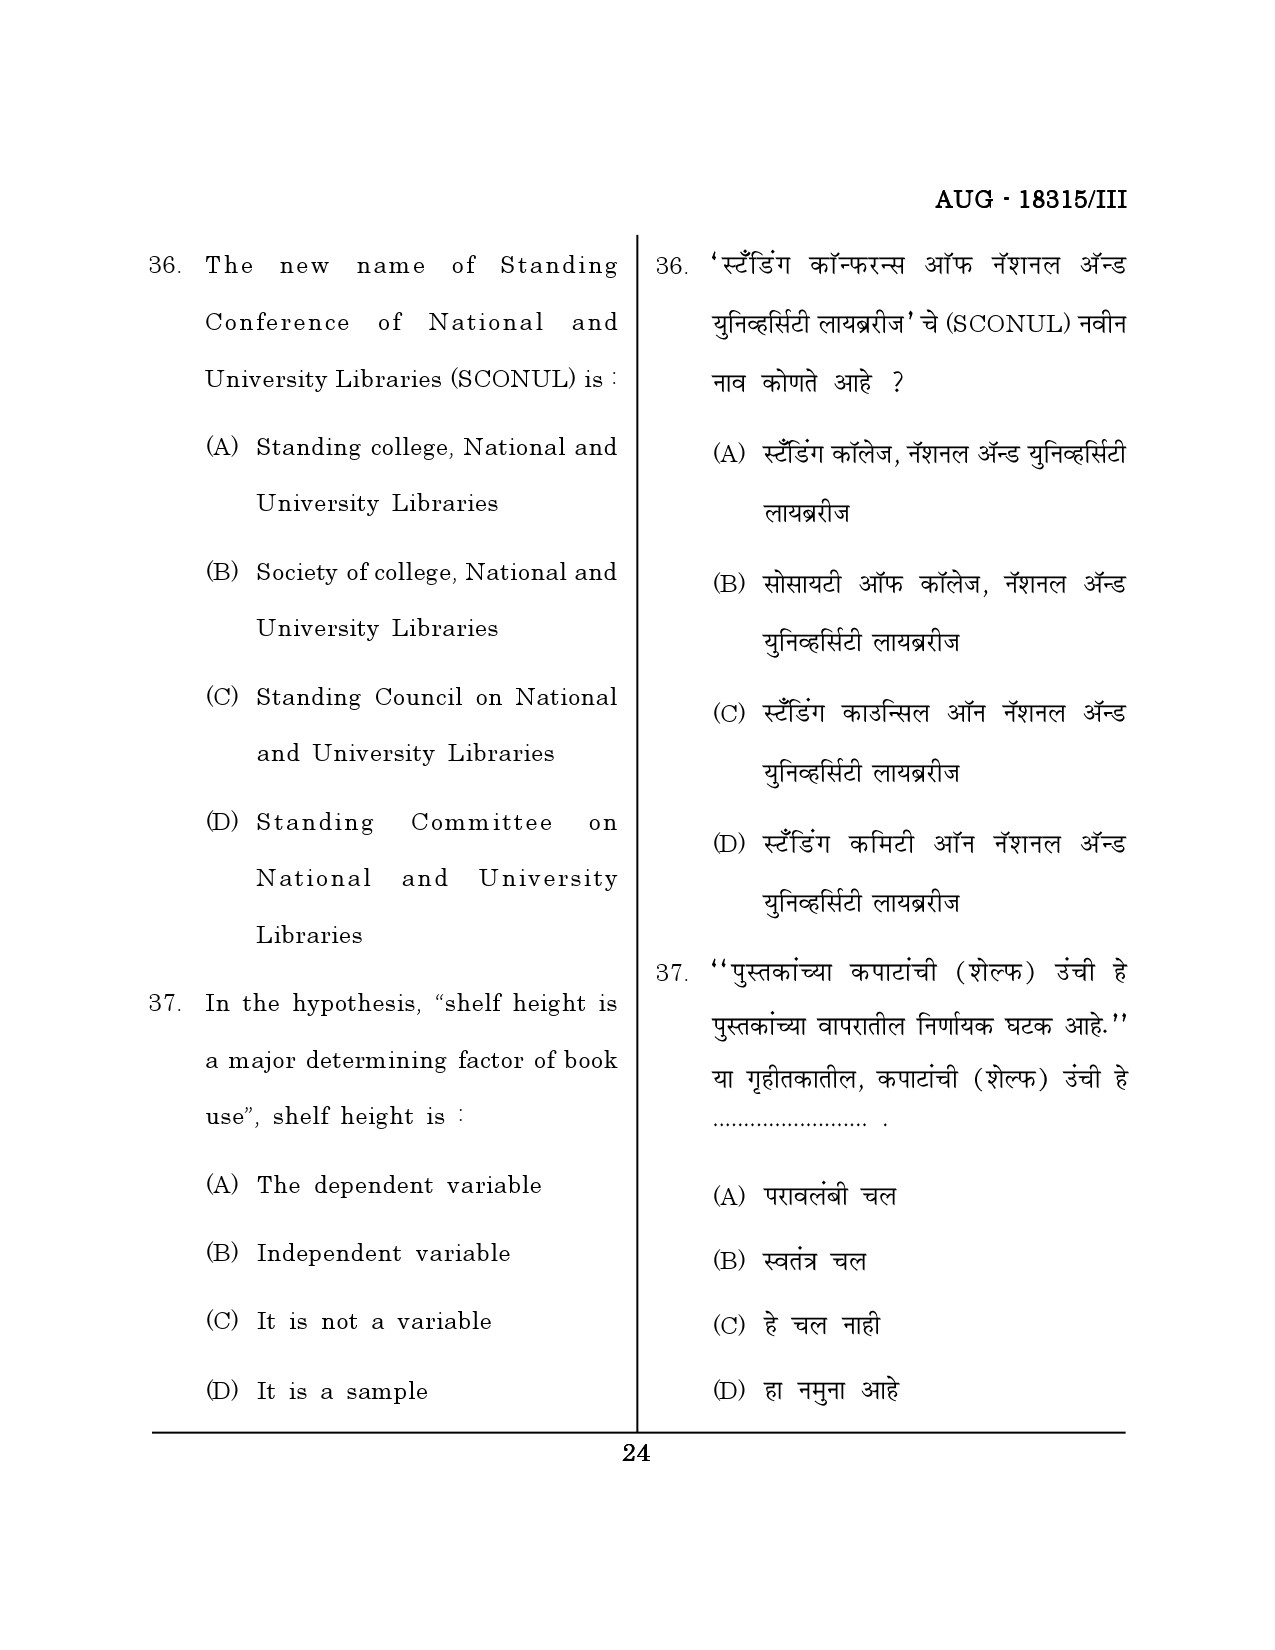 Maharashtra SET Library Information Science Question Paper III August 2015 23